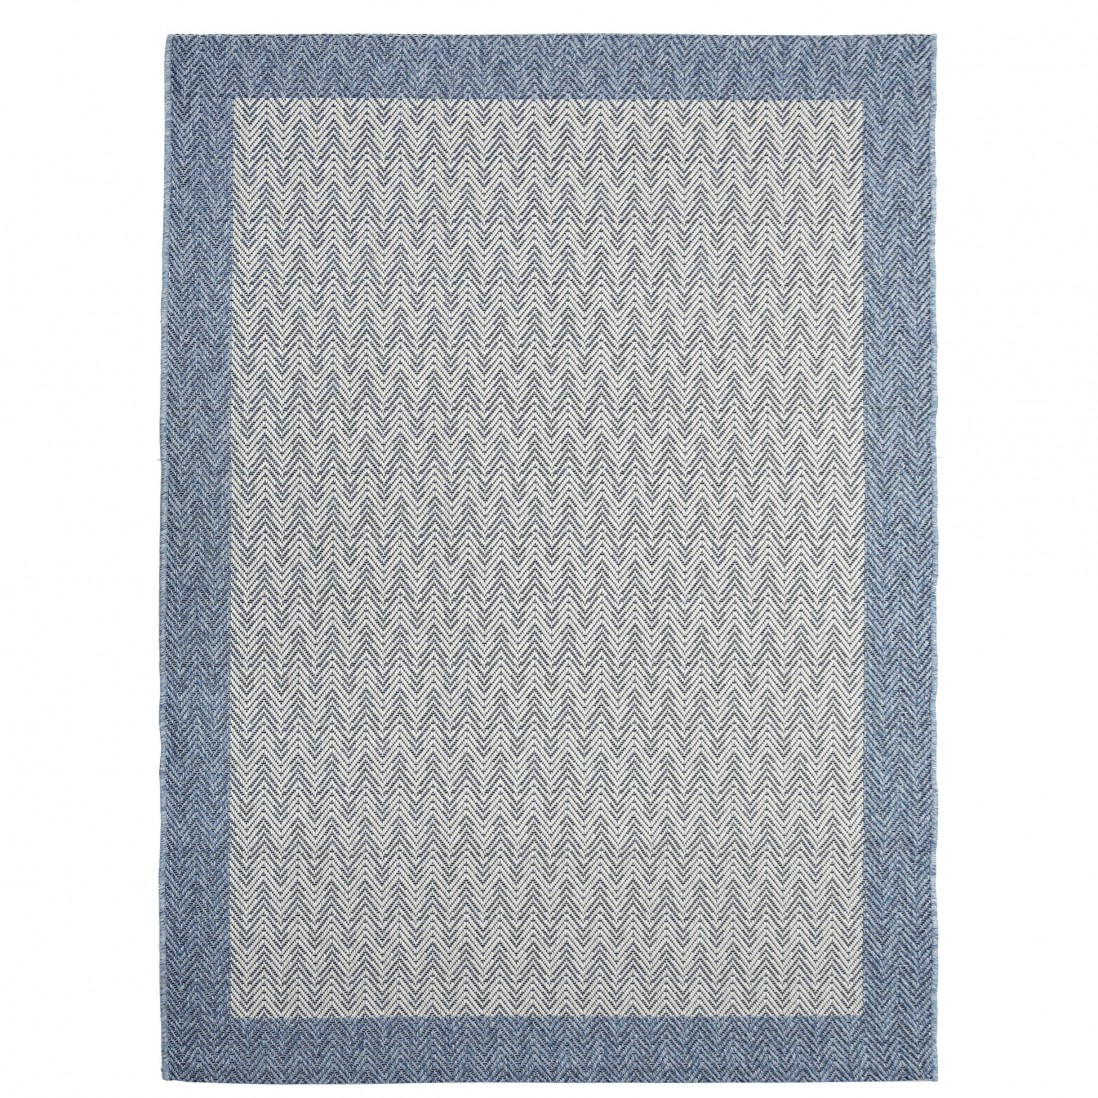 Caprice Weiss/Blue Area Rug